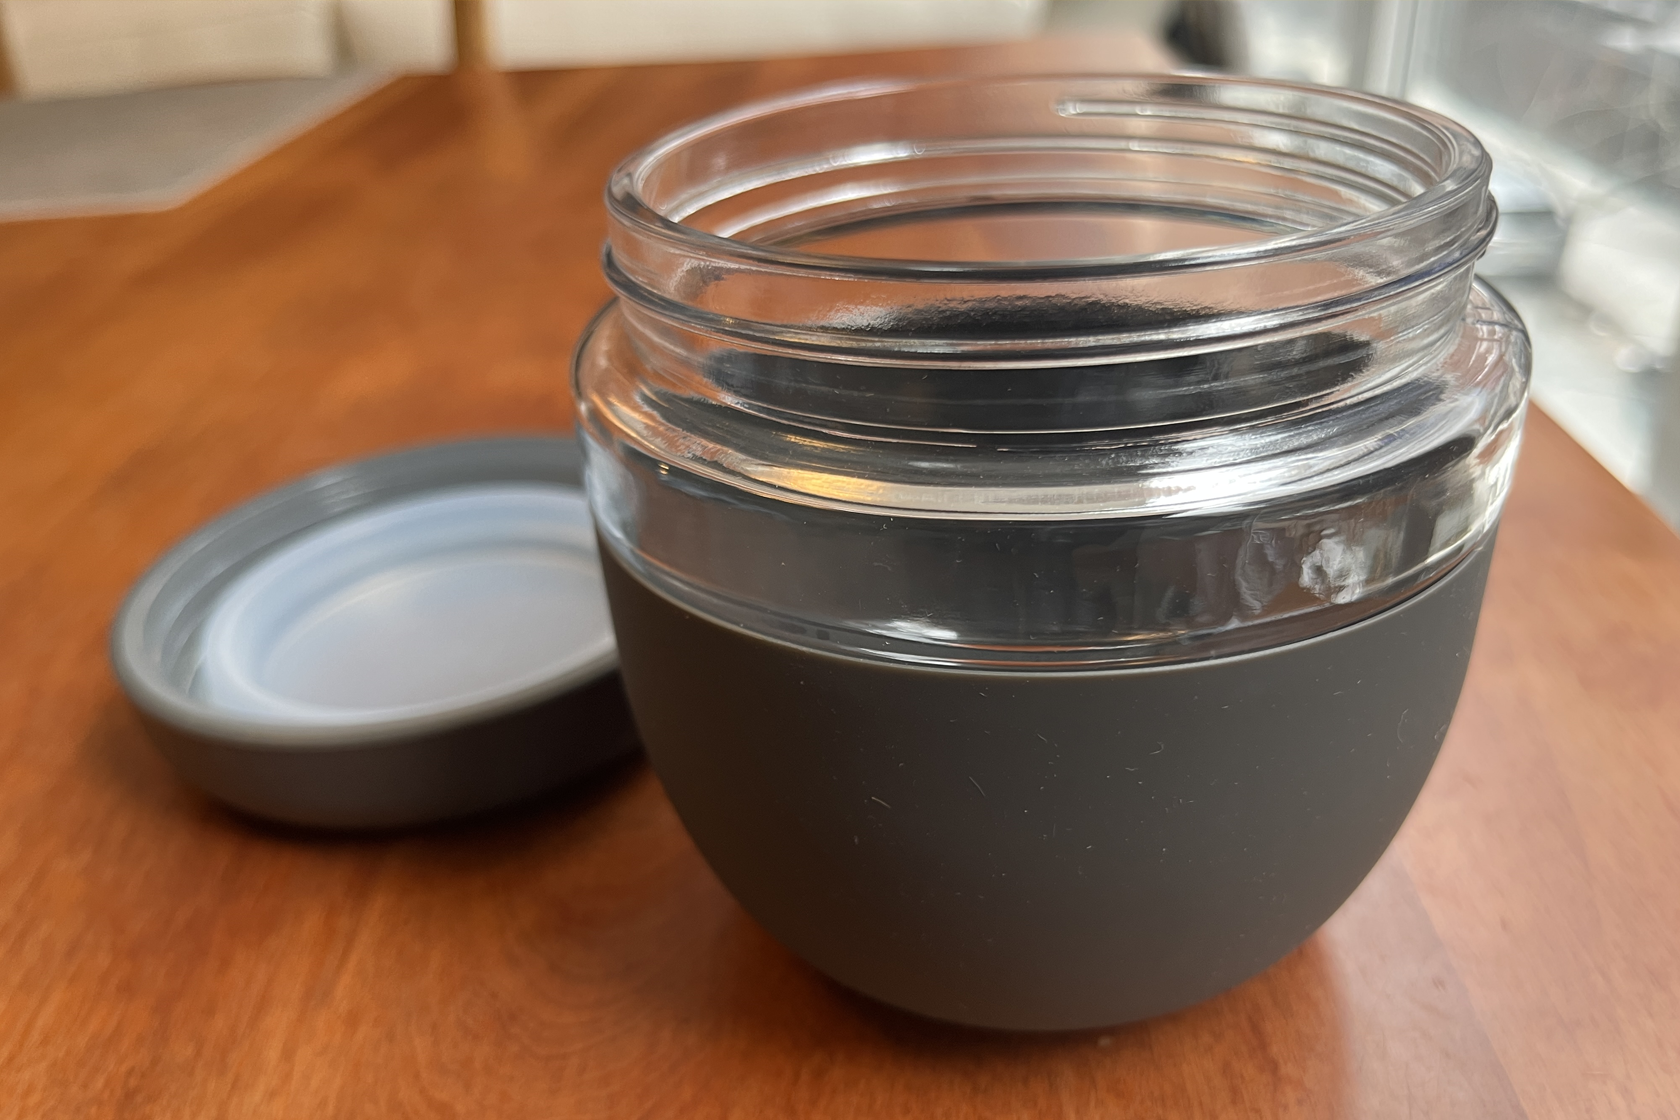 W&P Porter Seal Tight Bowl Lunch Container with Lid, 16oz, Mint